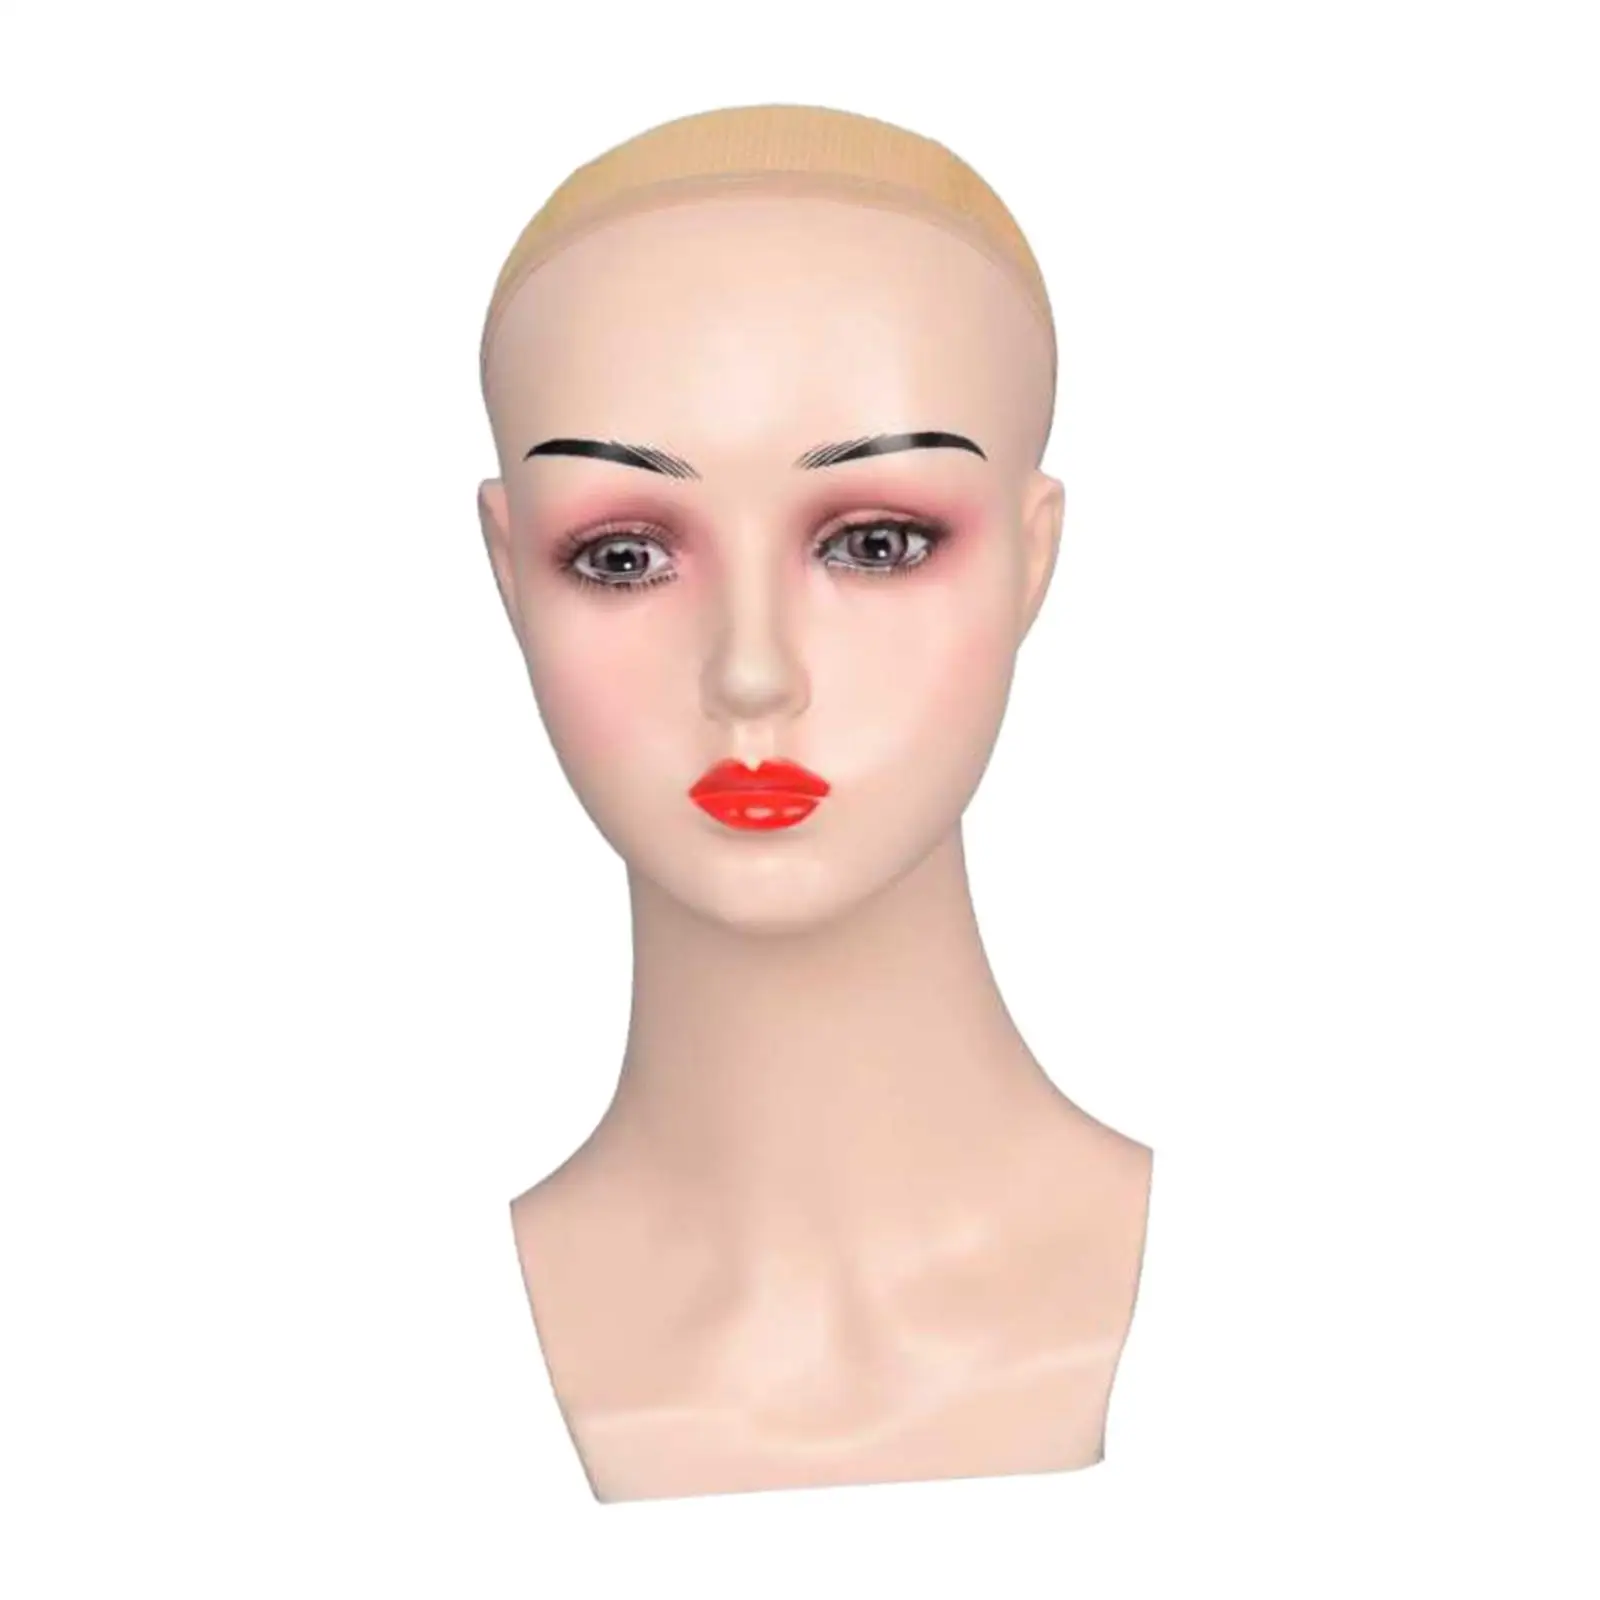 Female Bald Mannequin Head Stable Base Smooth Multipurpose Wig Holder Manikin for Glasses Hats Necklace Hairpieces Wigs Making